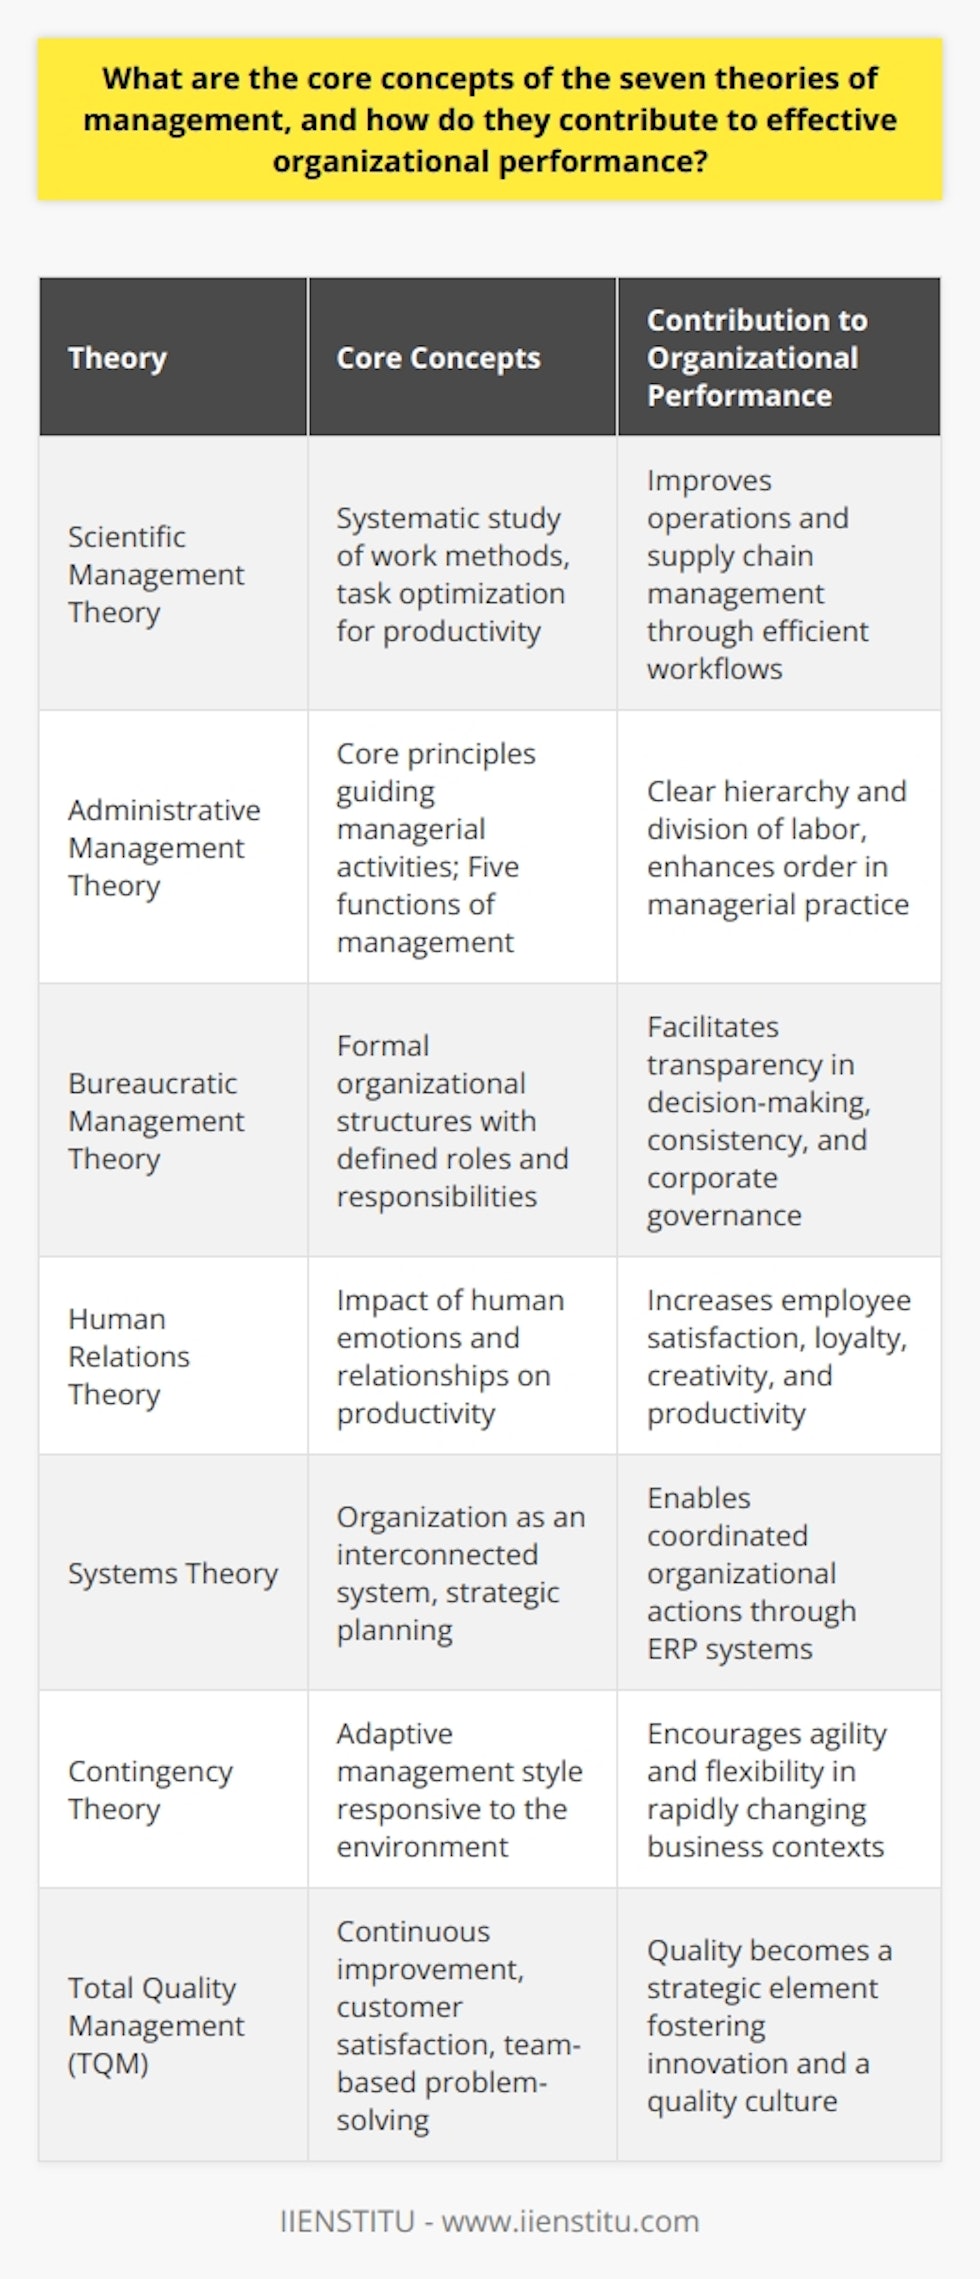 Management theories have evolved over time, each introducing distinct concepts that aim to enhance organizational performance. Critically analyzing these theories, it's apparent that each brings specific insights into effective management practice.**Scientific Management Theory** This theory involves systematic study of work methods to improve efficiency. It brought forth the idea of task optimization, allowing workers to be more productive. To this day, the ripple effects of scientific management can be felt in operations and supply chain management, where workflow analyses help to streamline processes for better efficiency.**Administrative Management Theory**Henri Fayol articulated that a set of core principles could guide managerial activities. He introduced the five functions of management—planning, organizing, commanding, coordinating, and controlling—which remain the cornerstone of many management education programs. Embracing these functions aids organizations in establishing a clear hierarchy and division of labor, optimizing operations through orderly managerial practice.**Bureaucratic Management Theory**Max Weber's contributions led to the notion of formal organizational structures with defined roles and responsibilities. This supports a transparent approach to decision-making, maintaining order and consistency. Bureaucratic structures have been essential in establishing the foundations for corporate governance and standard operating procedures.**Human Relations Theory**The realization that human emotions and interpersonal relationships play a significant role in employee productivity marked a shift to more inclusive managerial practices. By valuing employee satisfaction and engagement, organizations can experience enhanced loyalty, creativity, and productivity, essential assets for any company seeking to thrive in a competitive environment.**Systems Theory**This theory views an organization as an entity comprised of interconnected components that work together to achieve a common goal. A system’s perspective allows for strategic planning and management, where the impact of one component is recognized on the entire system. Modern enterprise resource planning (ERP) systems echo this understanding, enabling coordinated action across various departments.**Contingency Theory**No single management style fits all situations according to contingency theory. It posits that management must be responsive and adaptive to the environment, leading to tailored strategies for each unique challenge. This fluid approach to management is particularly beneficial in today's rapidly changing business landscape, where agility and flexibility are rewarded.**Total Quality Management (TQM)**With an emphasis on continuous improvement and customer satisfaction, TQM integrates quality as a strategic element across all organizational processes. In applying TQM principles, organizations focus on team-based approaches to problem-solving and innovation, ensuring that quality is embedded in the culture and operations of the company.*IIENSTITU*, as an education platform, honors these traditional theories while also incorporating cutting-edge methodologies to educate modern managers. By understanding and applying the tenets of these theories, organizations can enhance their decision-making, strategic vision, and operational practices. The synthesis of these theories can form a robust framework for leading effective and dynamic organizations primed to succeed in an era of complexity and change.